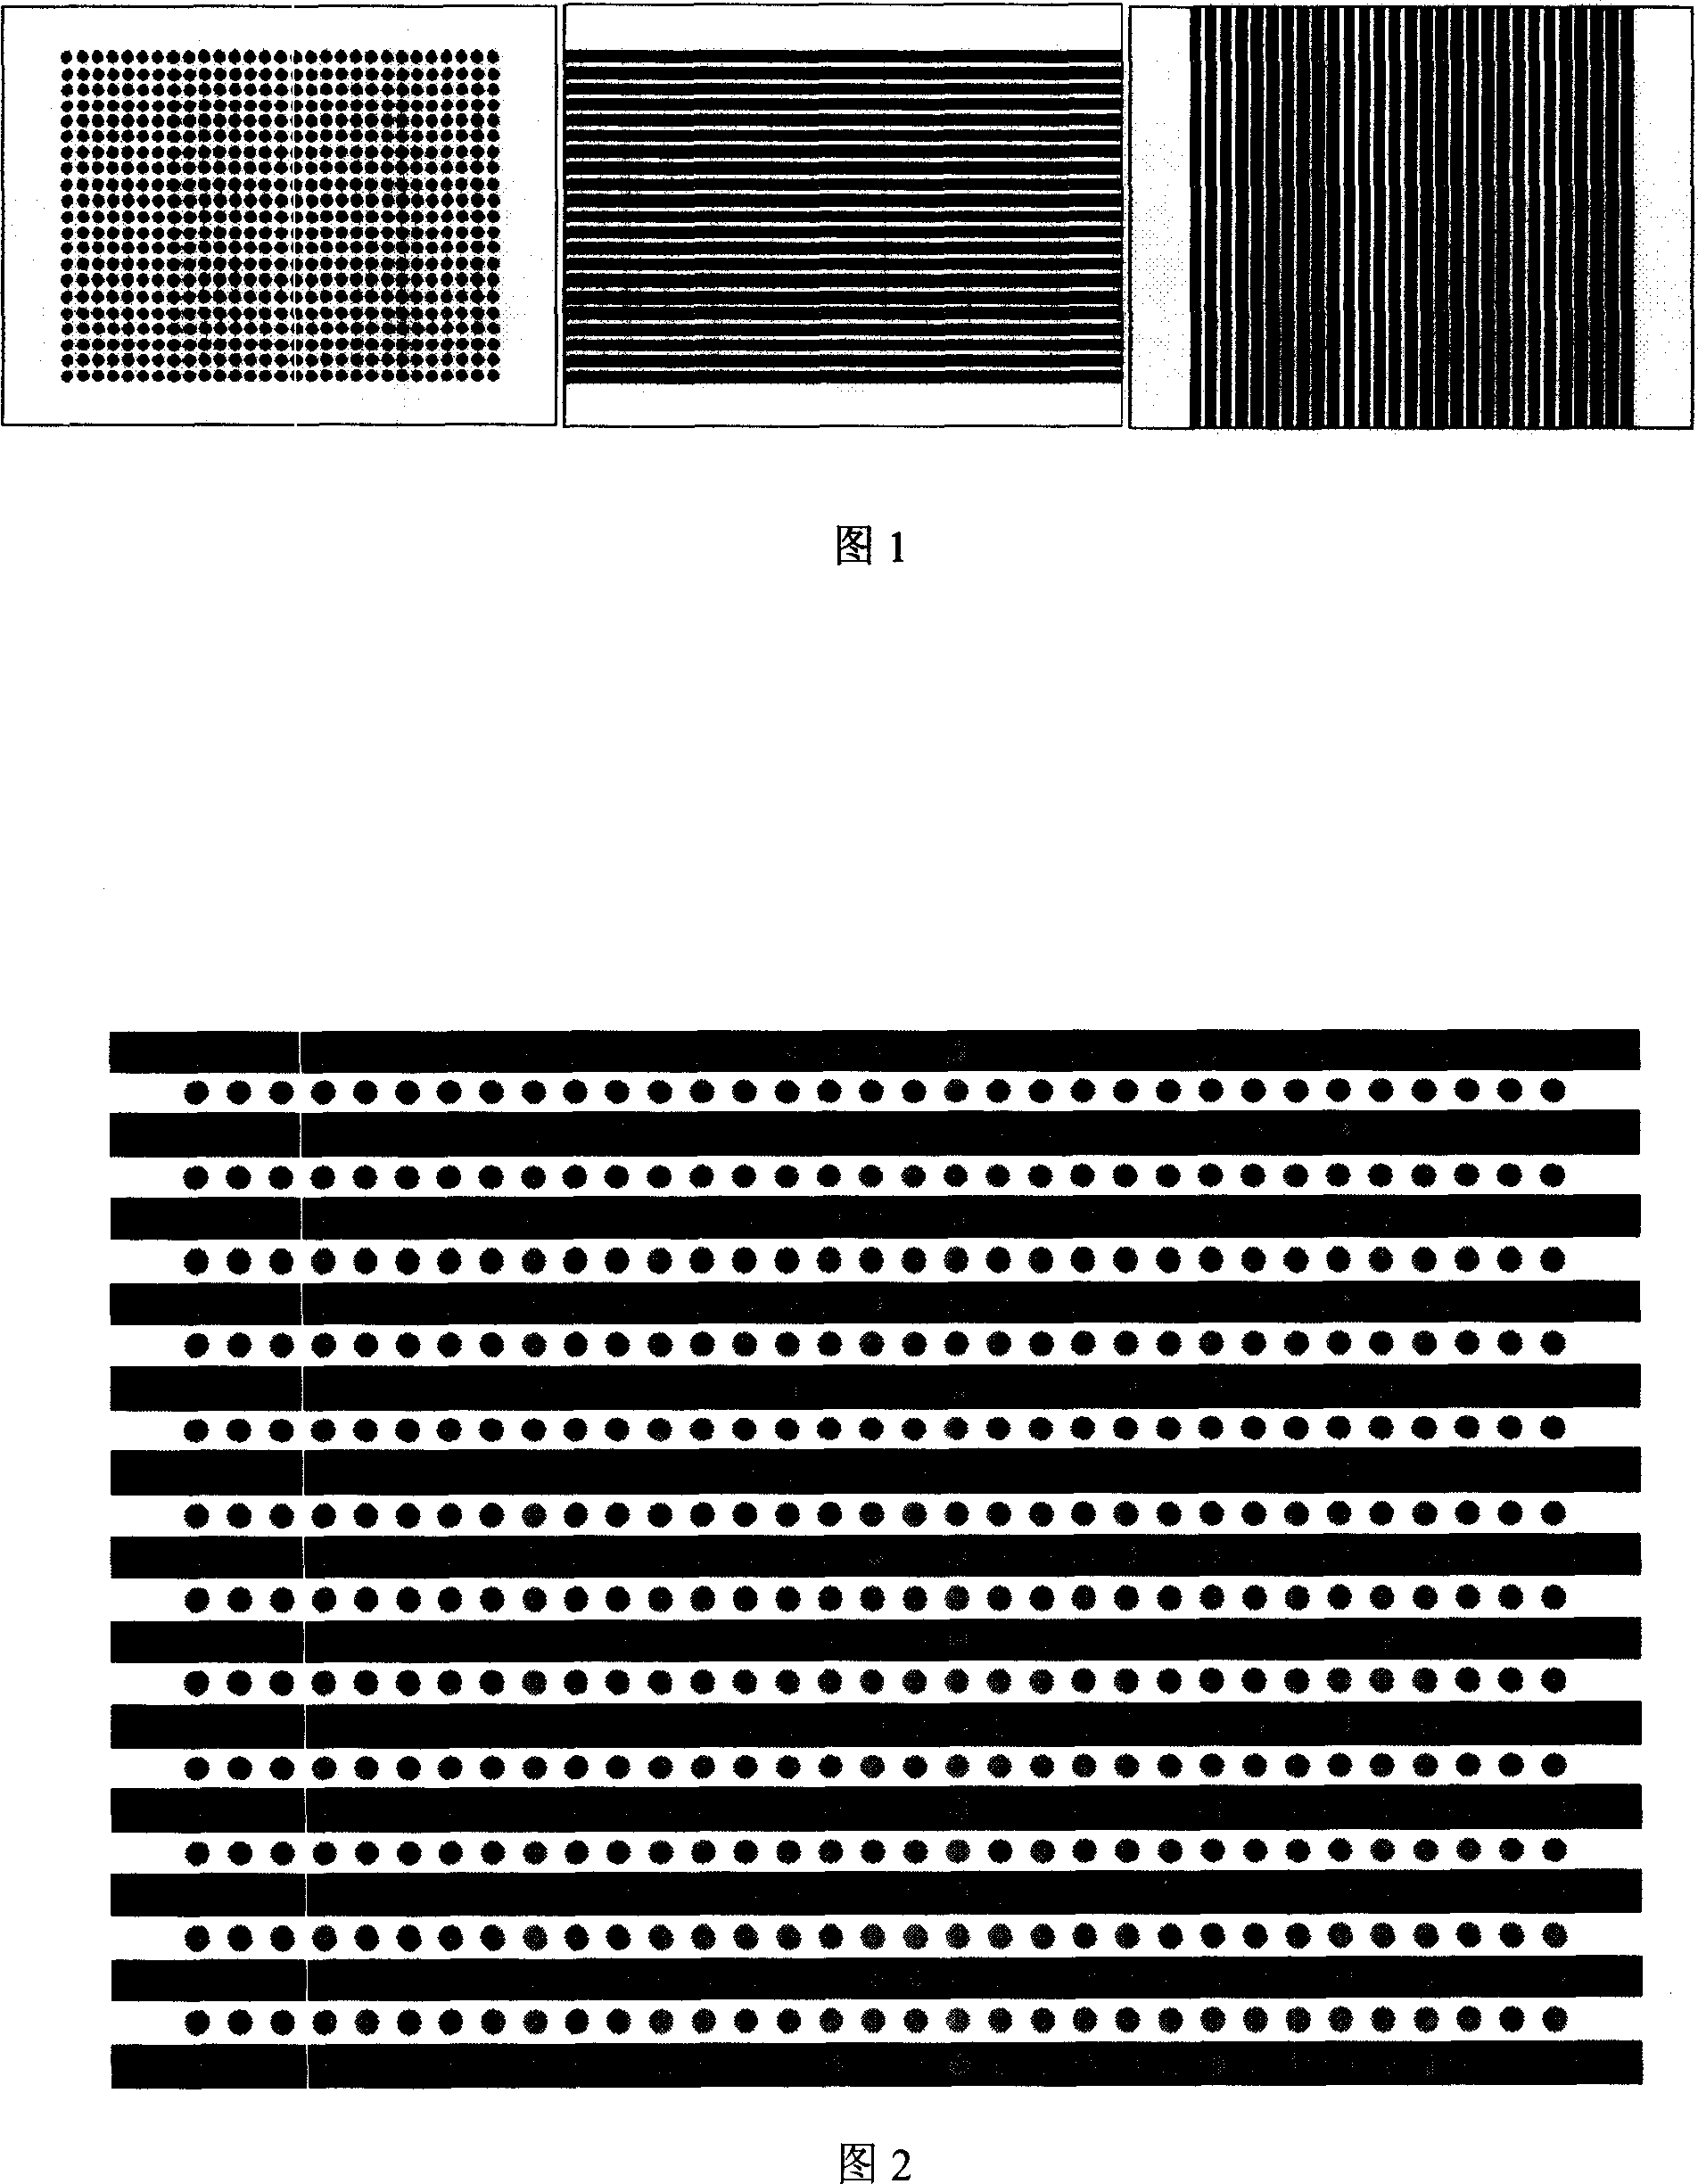 Distortion measurement and correction method for CCD shooting system and comprehensive test target